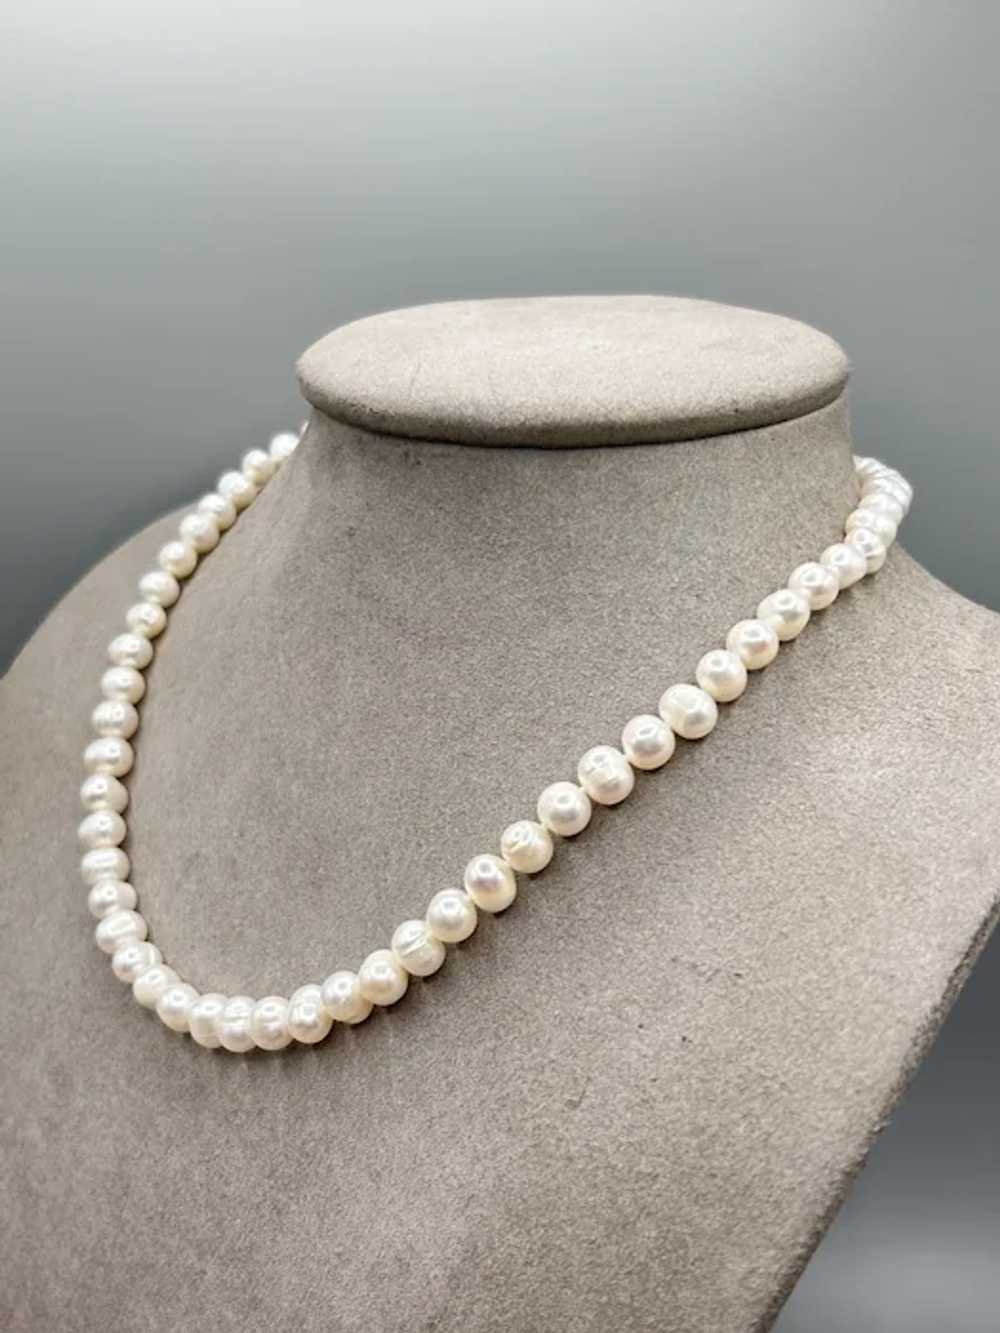 Beaded Genuine Pearls Necklace Hand Knotted Irreg… - image 5